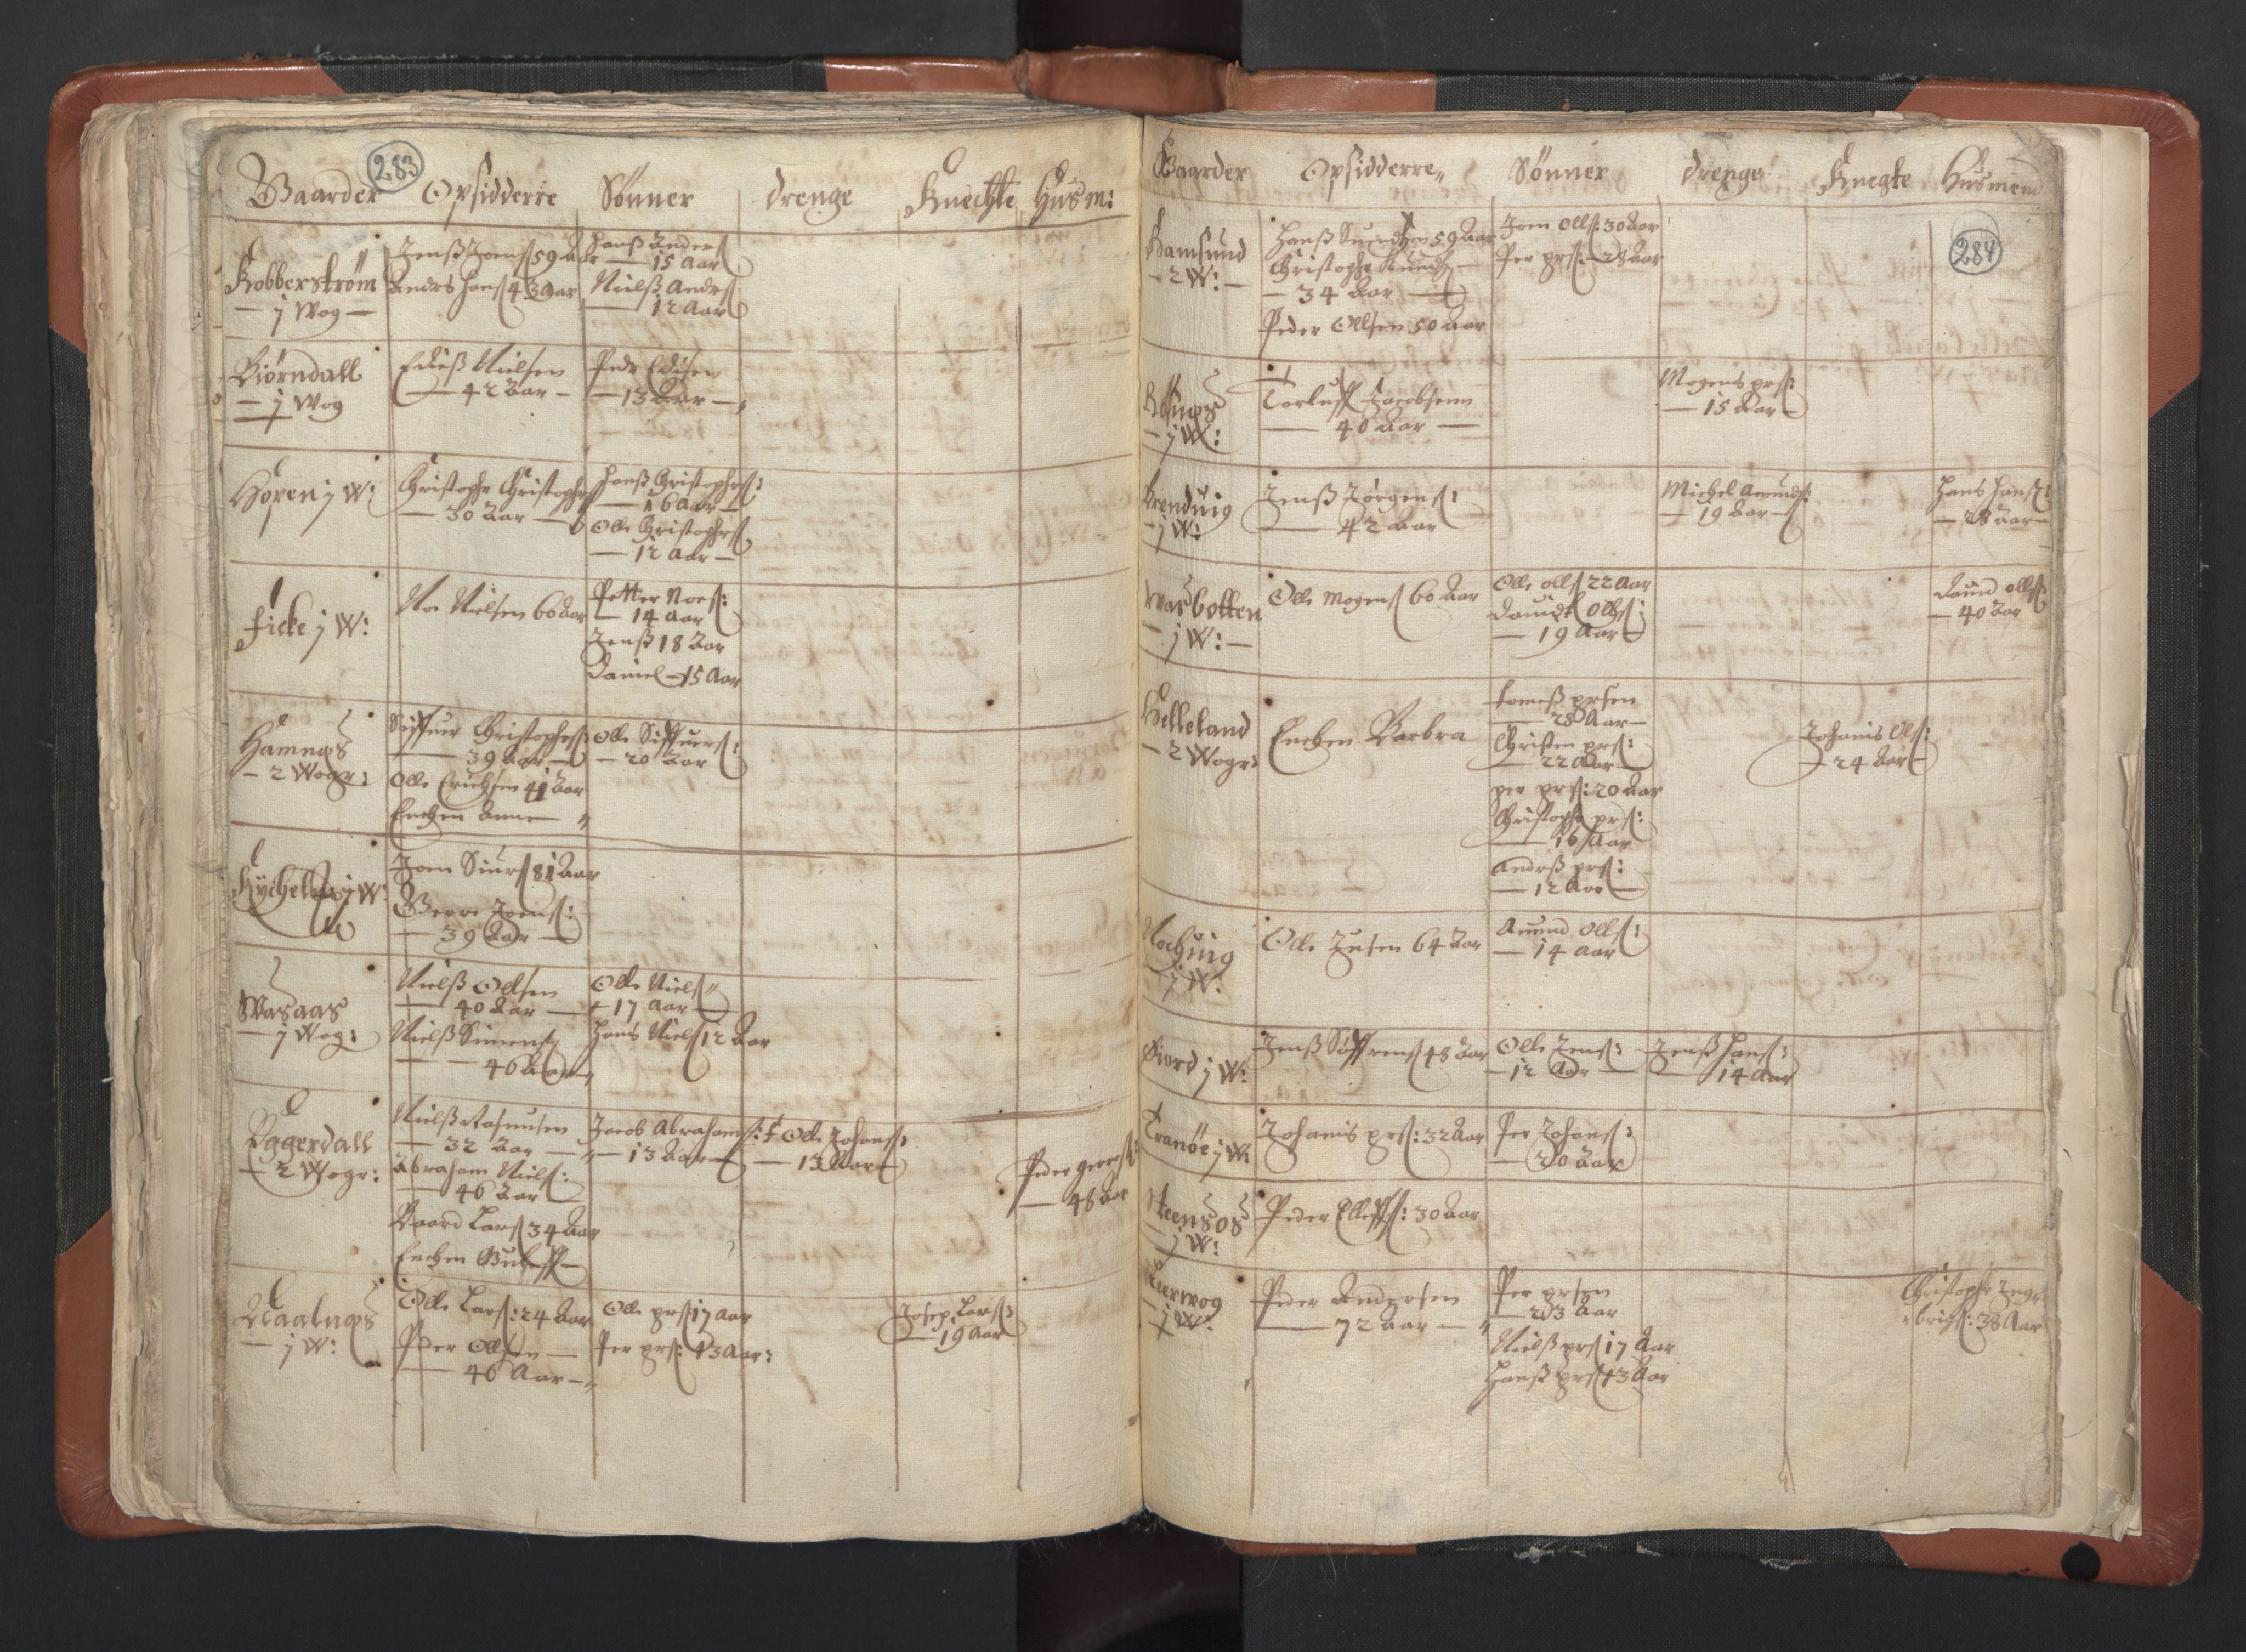 RA, Vicar's Census 1664-1666, no. 35: Helgeland deanery and Salten deanery, 1664-1666, p. 283-284